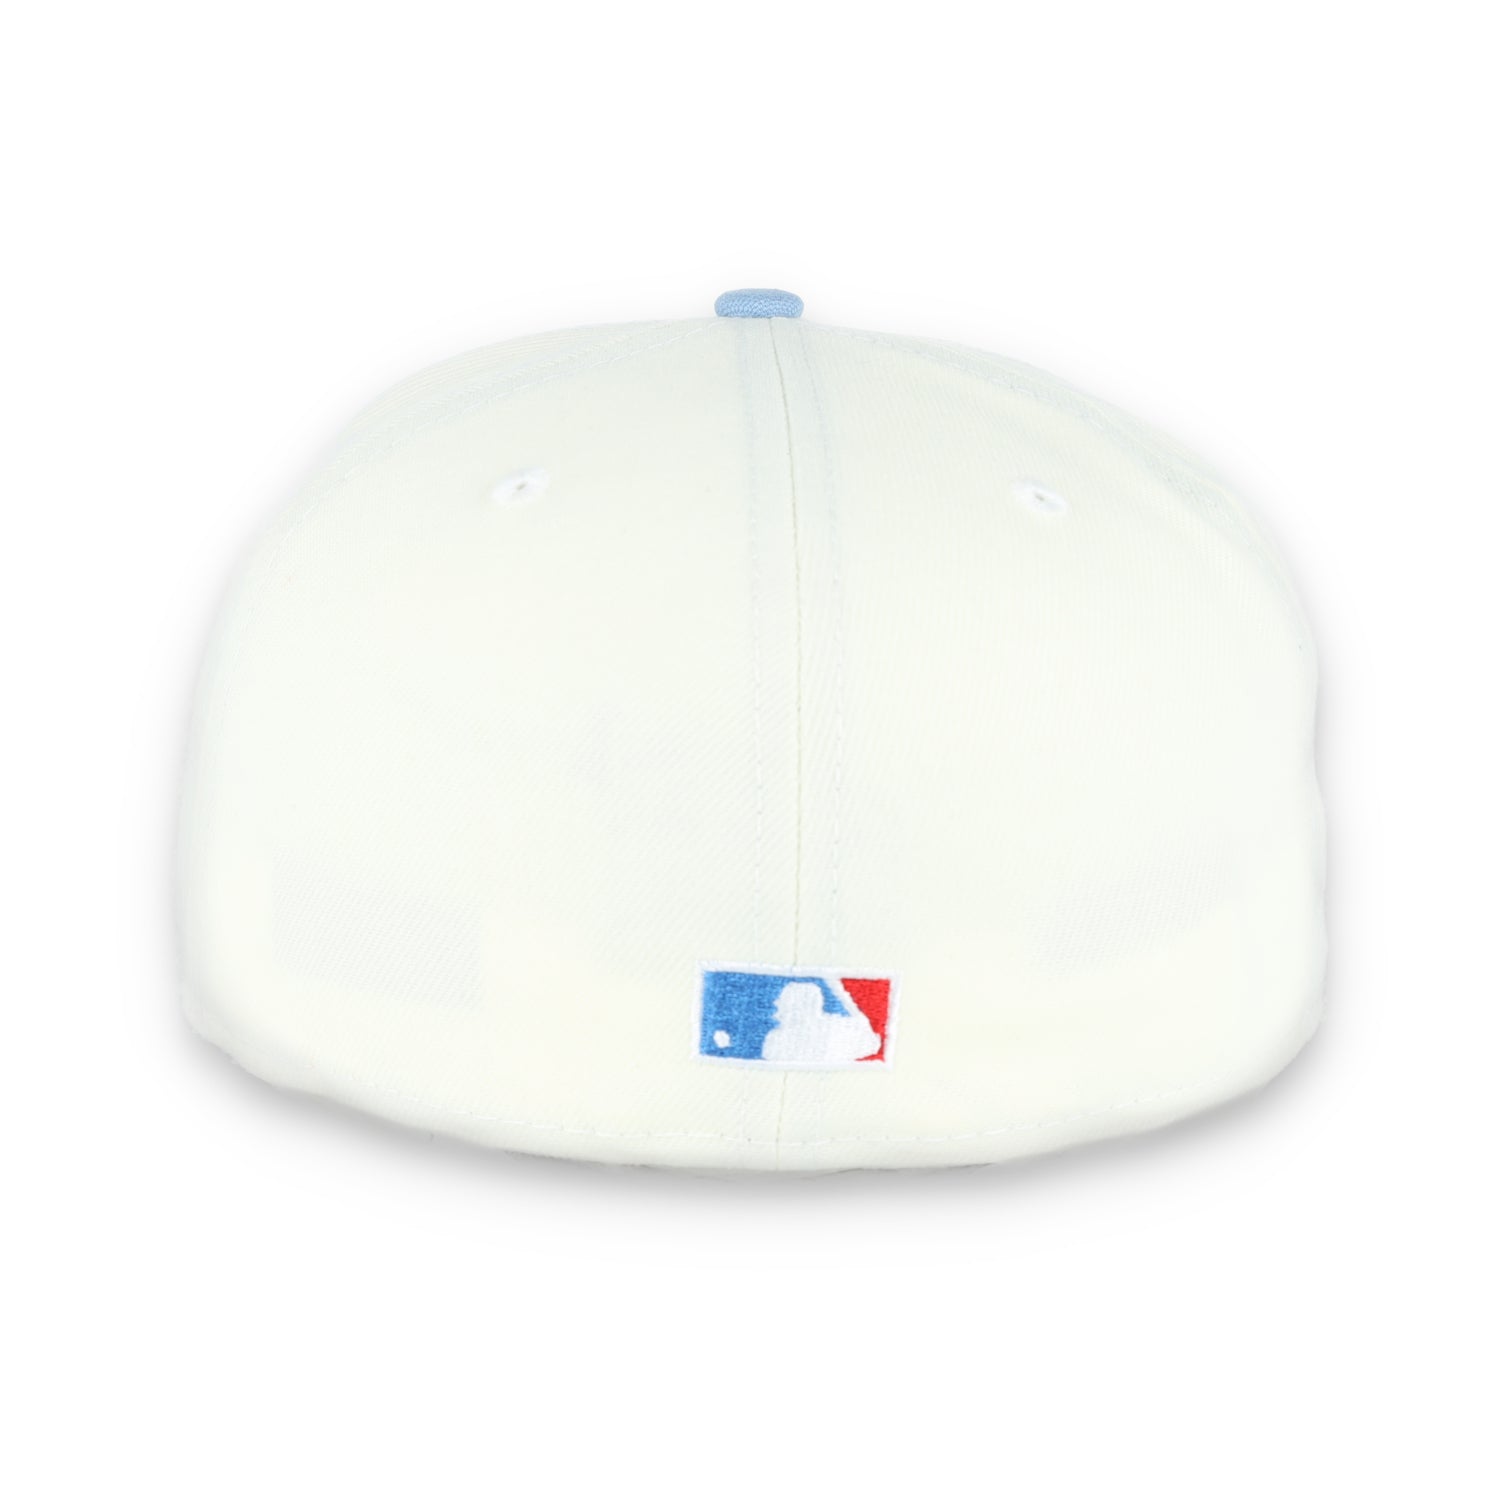 New Era California Angels Ivory Patch 59FIFTY Fitted Hat